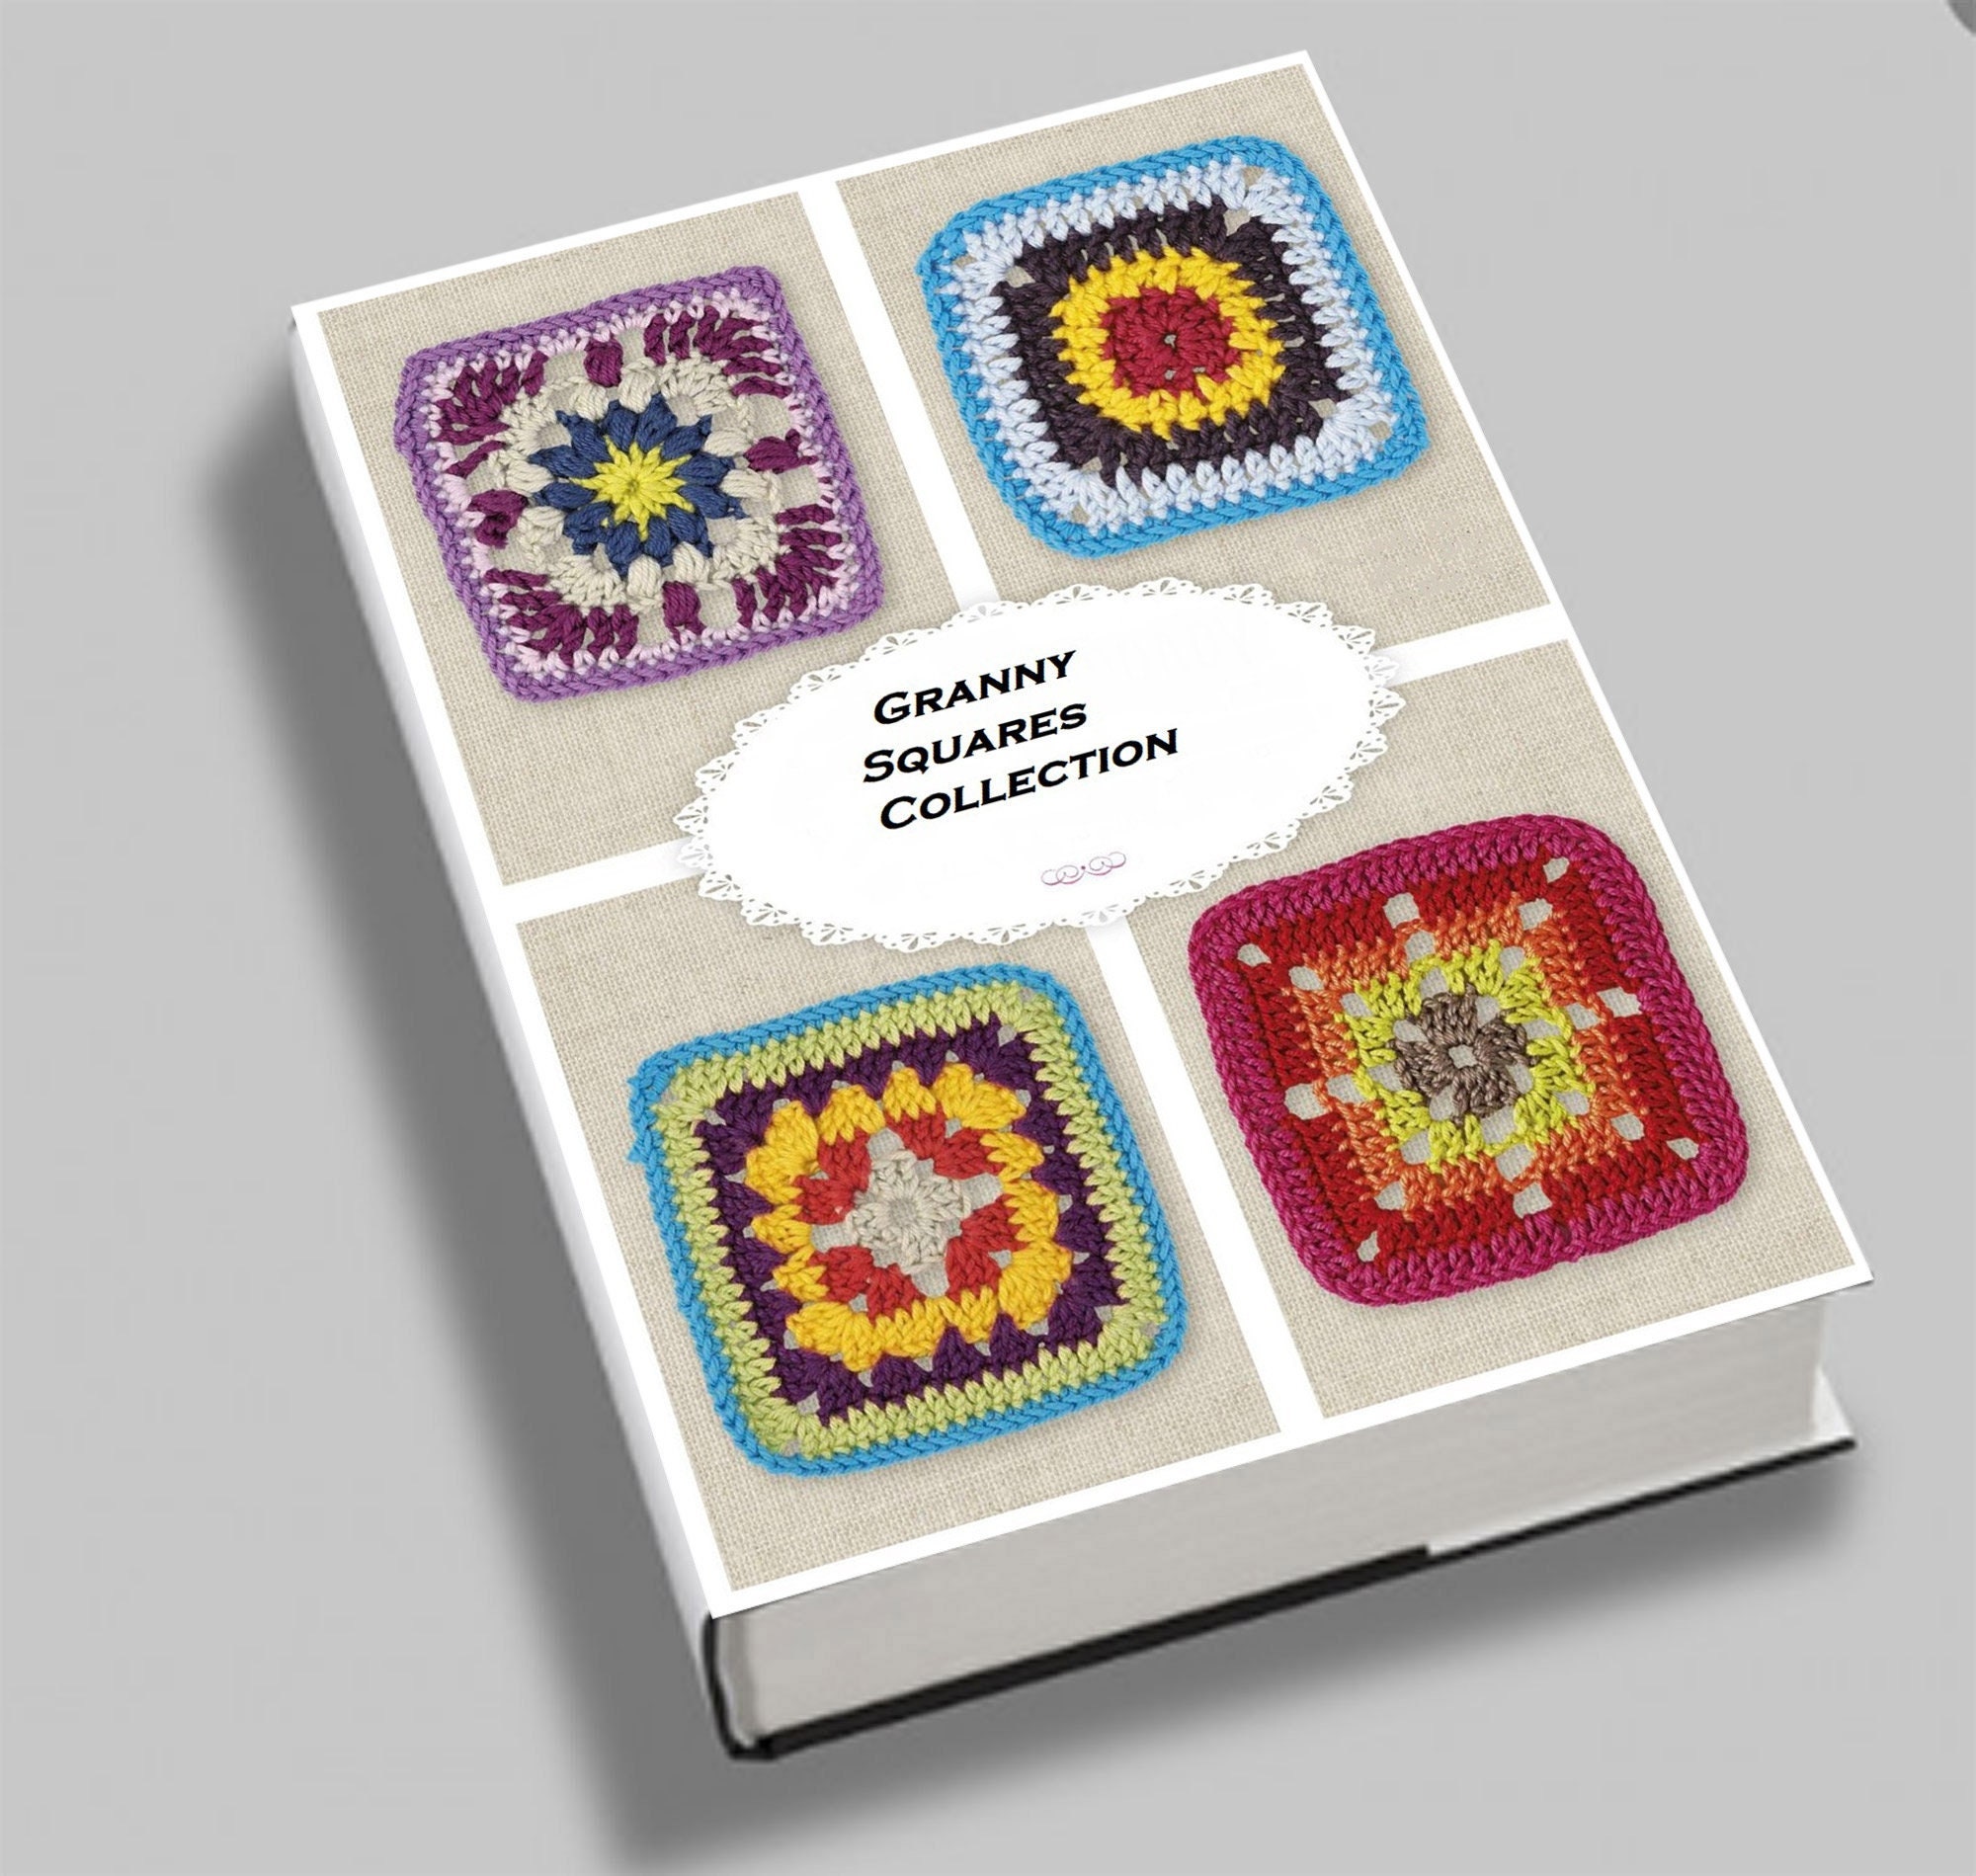 Granny Square Book Sleeves, Crochet Pattern, Crochet Book Sleeves, Book  Lovers Gift, Handmade Gift, Book Tidy, Book Cover, Crochet Gift, 